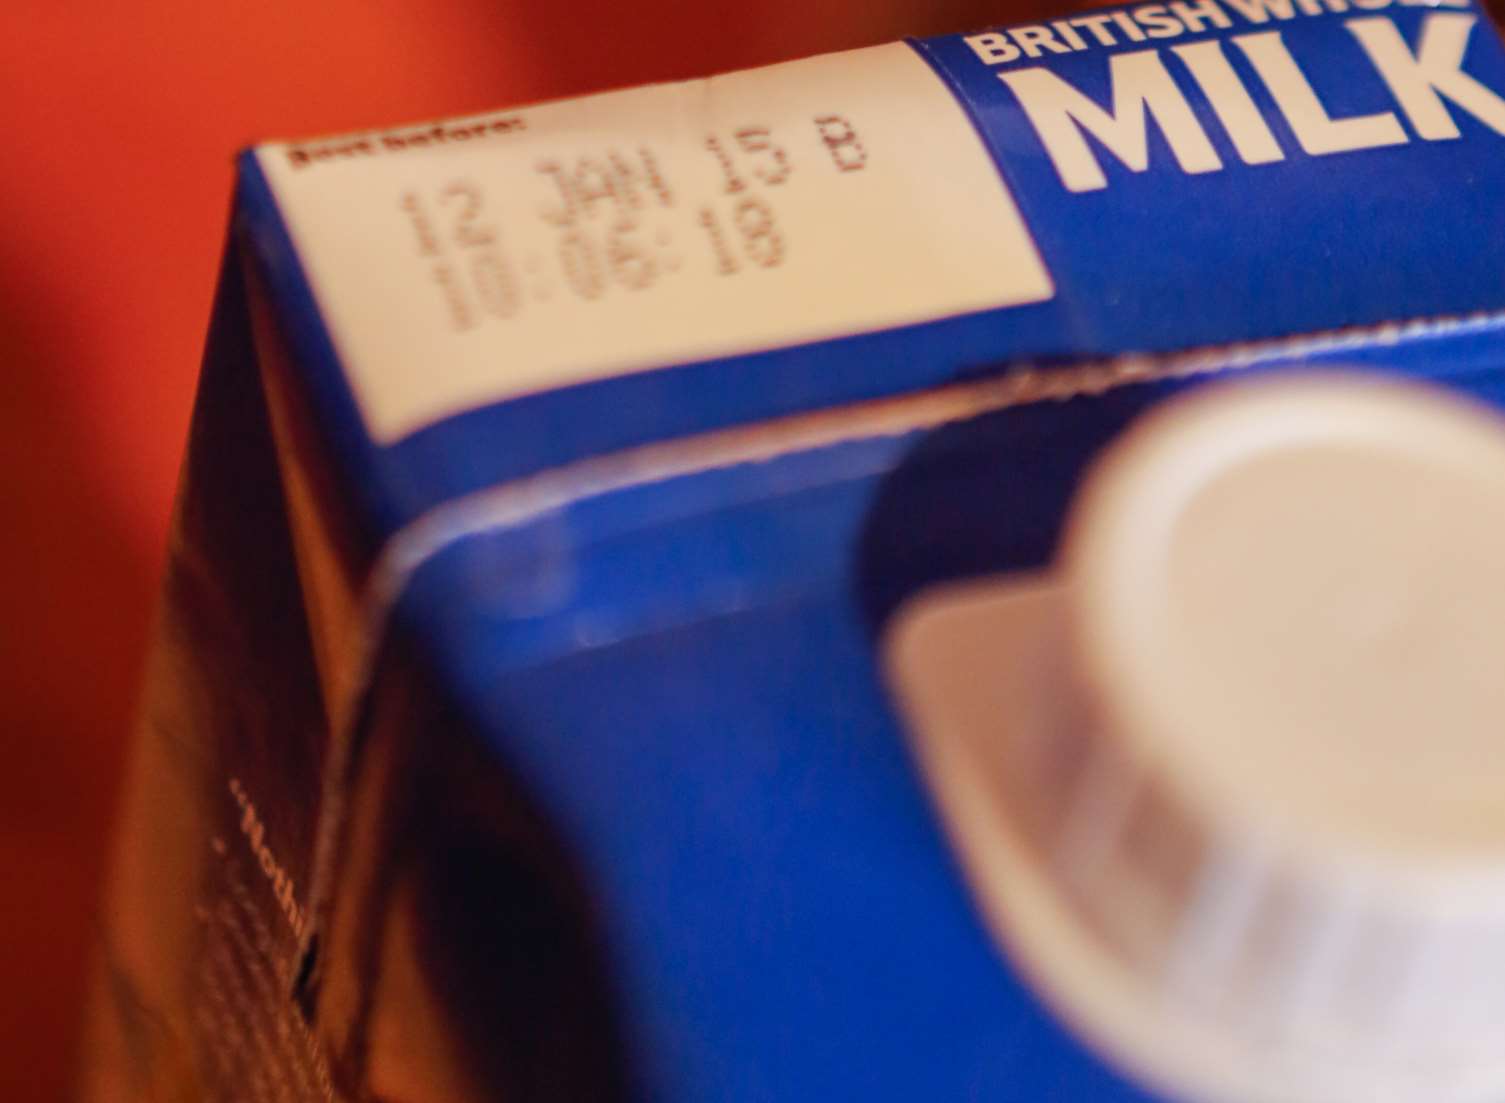 The receipt and the date on carton. Picture by: Matthew Walker